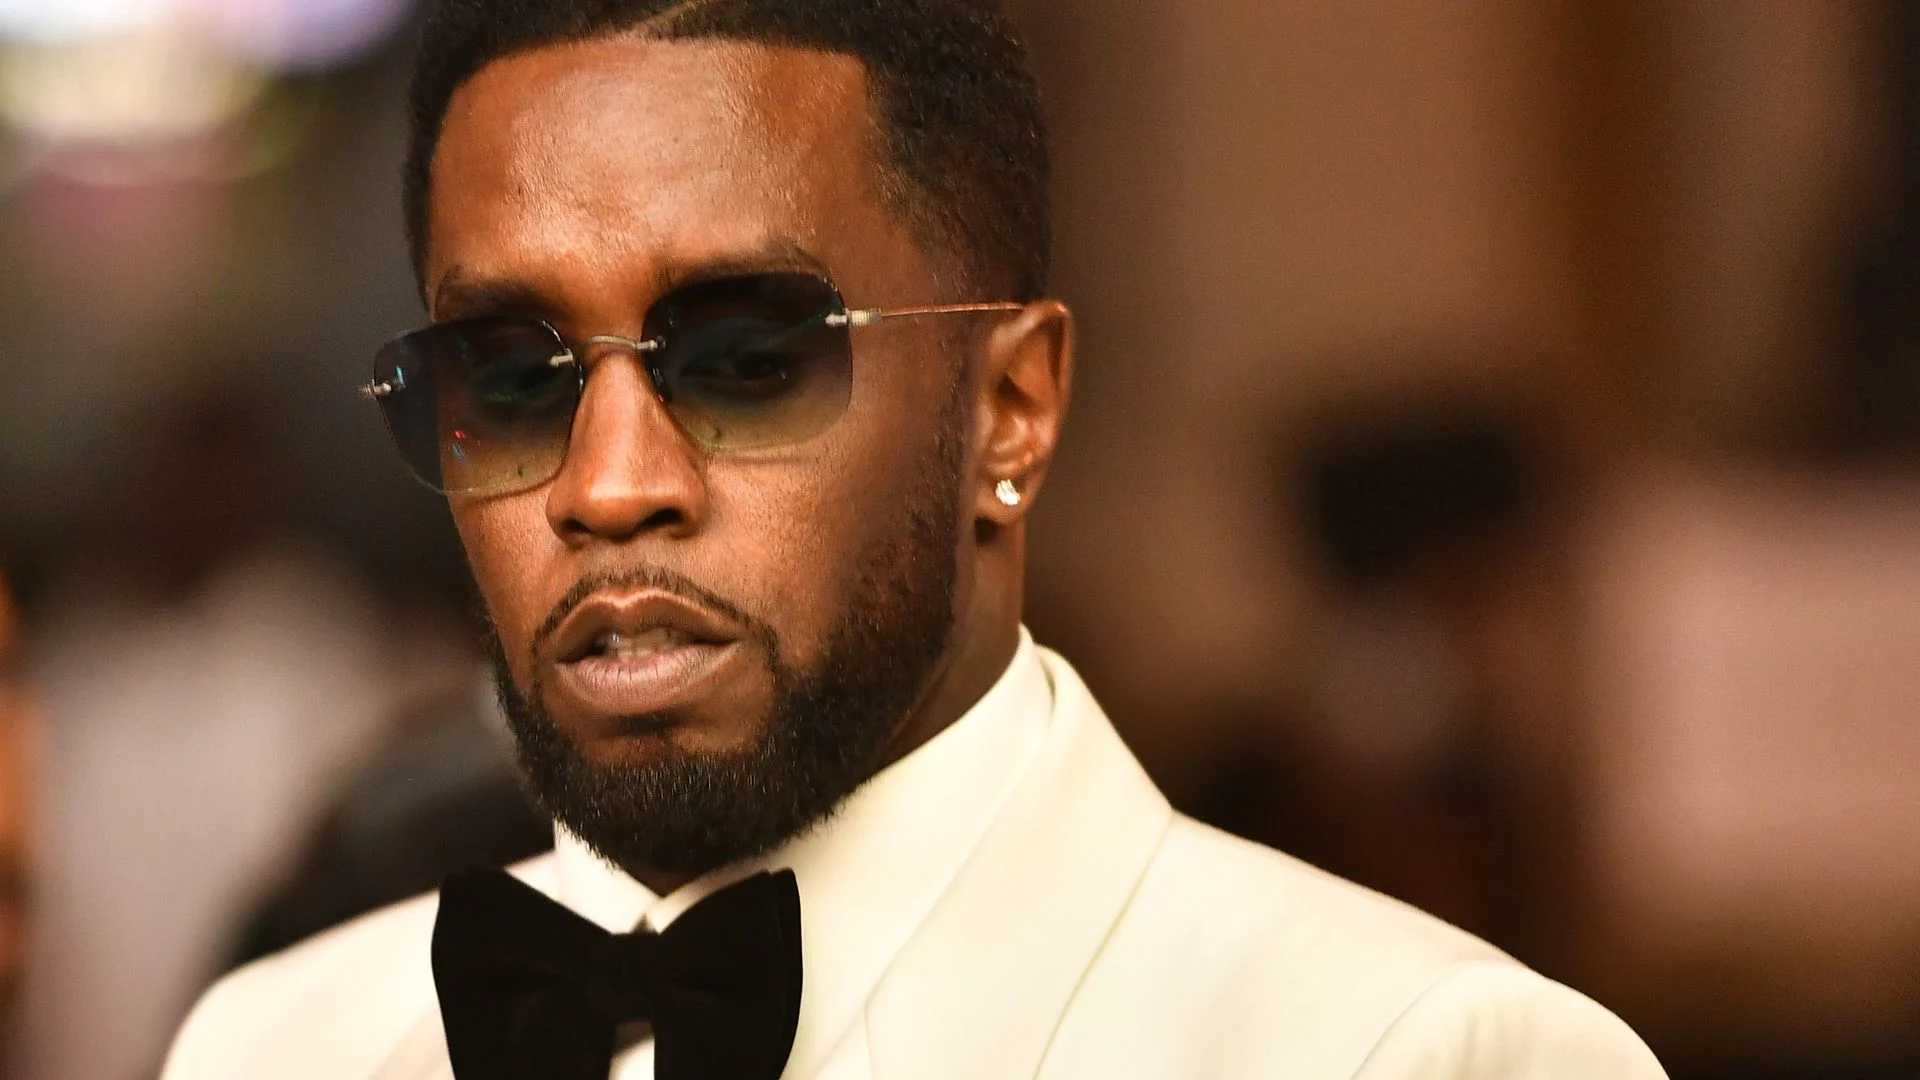 Timeline of Sean 'Diddy' Combs' sexual assault lawsuits: Harrowing allegations of sex trafficking, rape and more